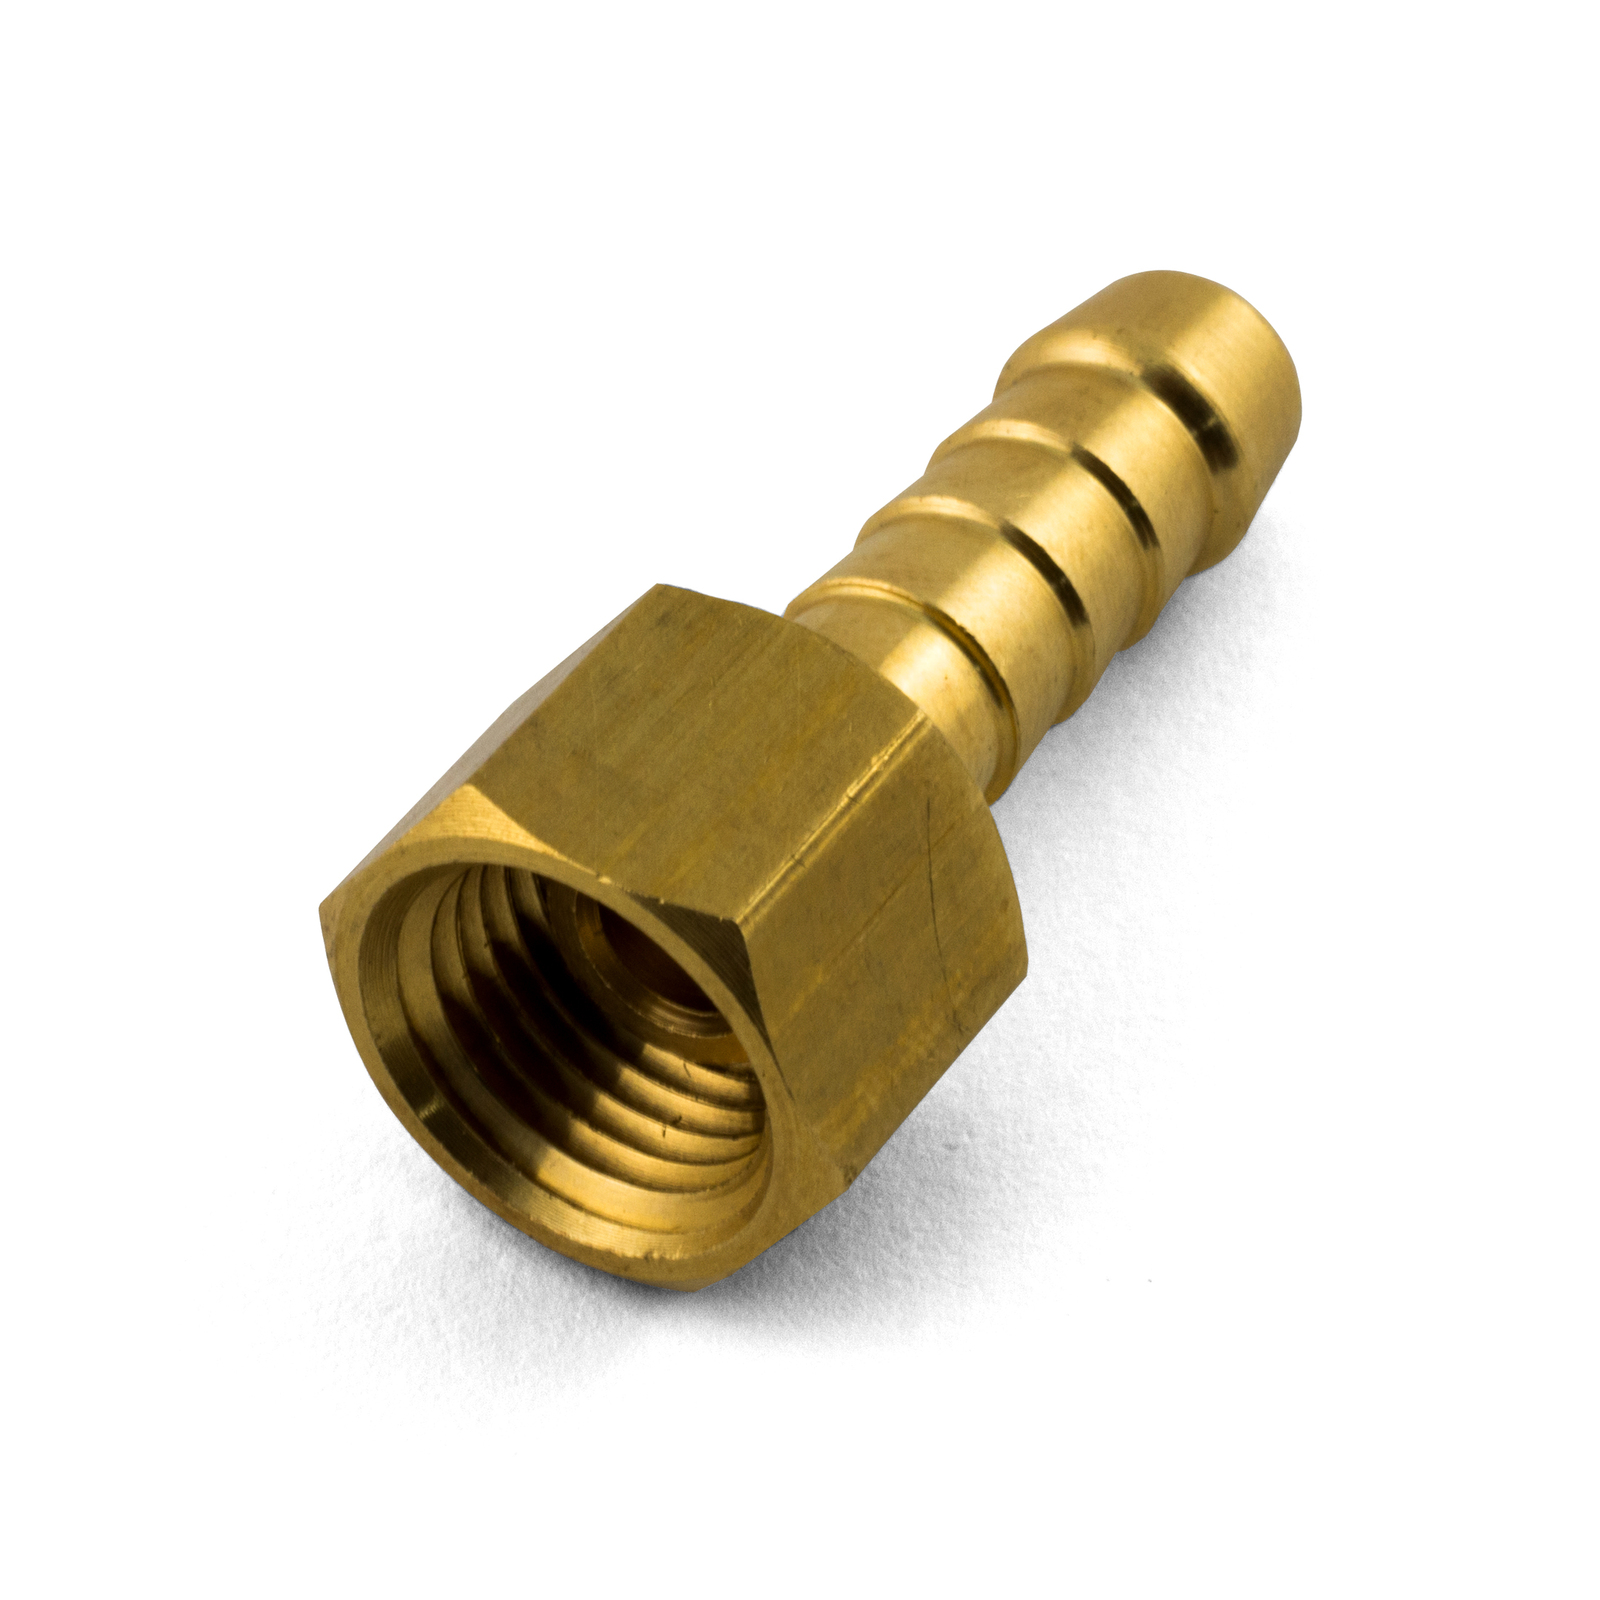 1/4 BSP Regulator Brass Barb Fitting for 8mm Hose - Suits Outdoor Cookers and Wok Burners 